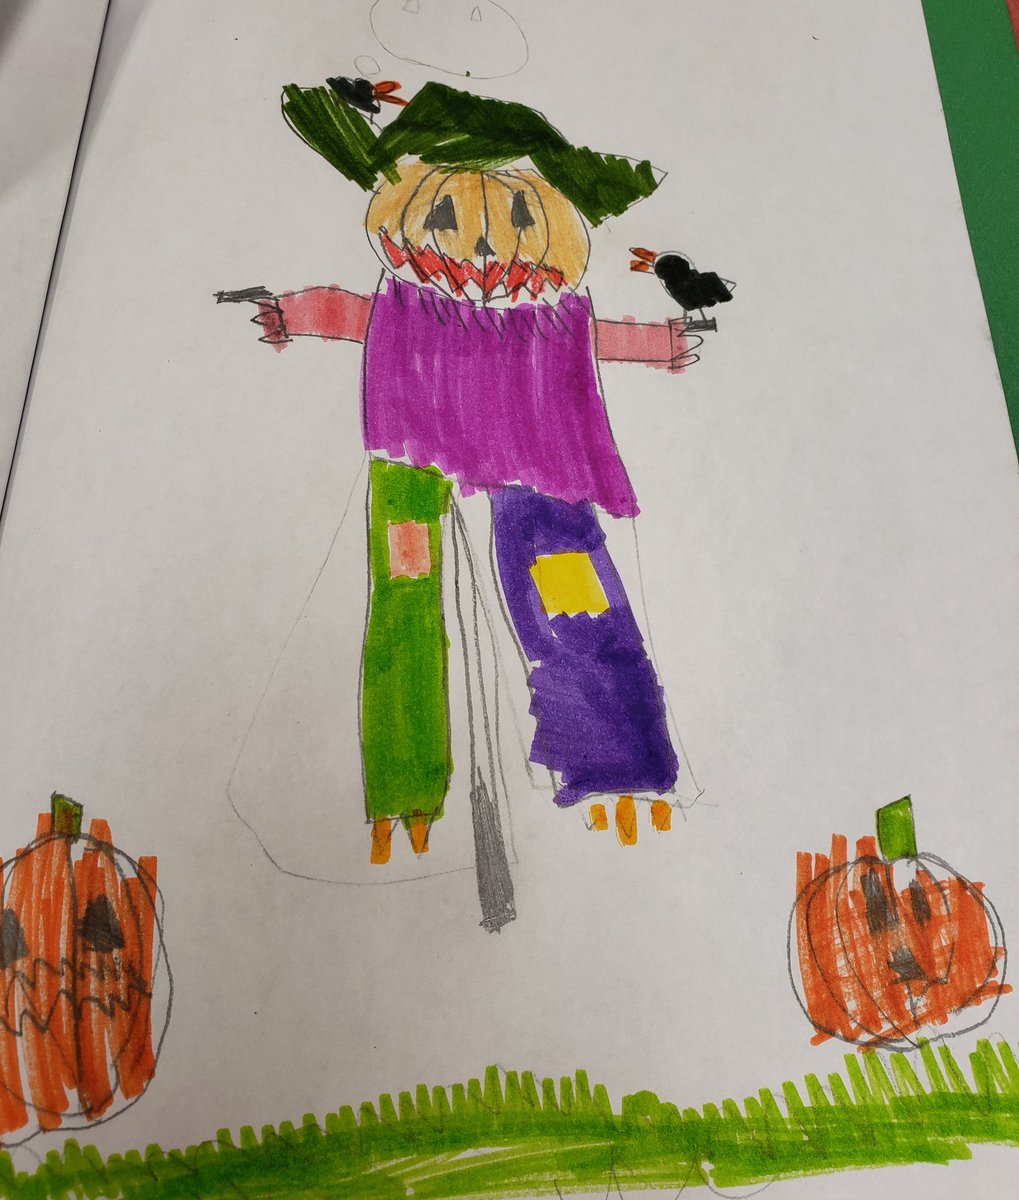 Finished up our mini unit on Fall/Autumn by creating drawings of scarecrows using Art Hub for Kids.
#haysboroloveslearning 
#seasonalchanges